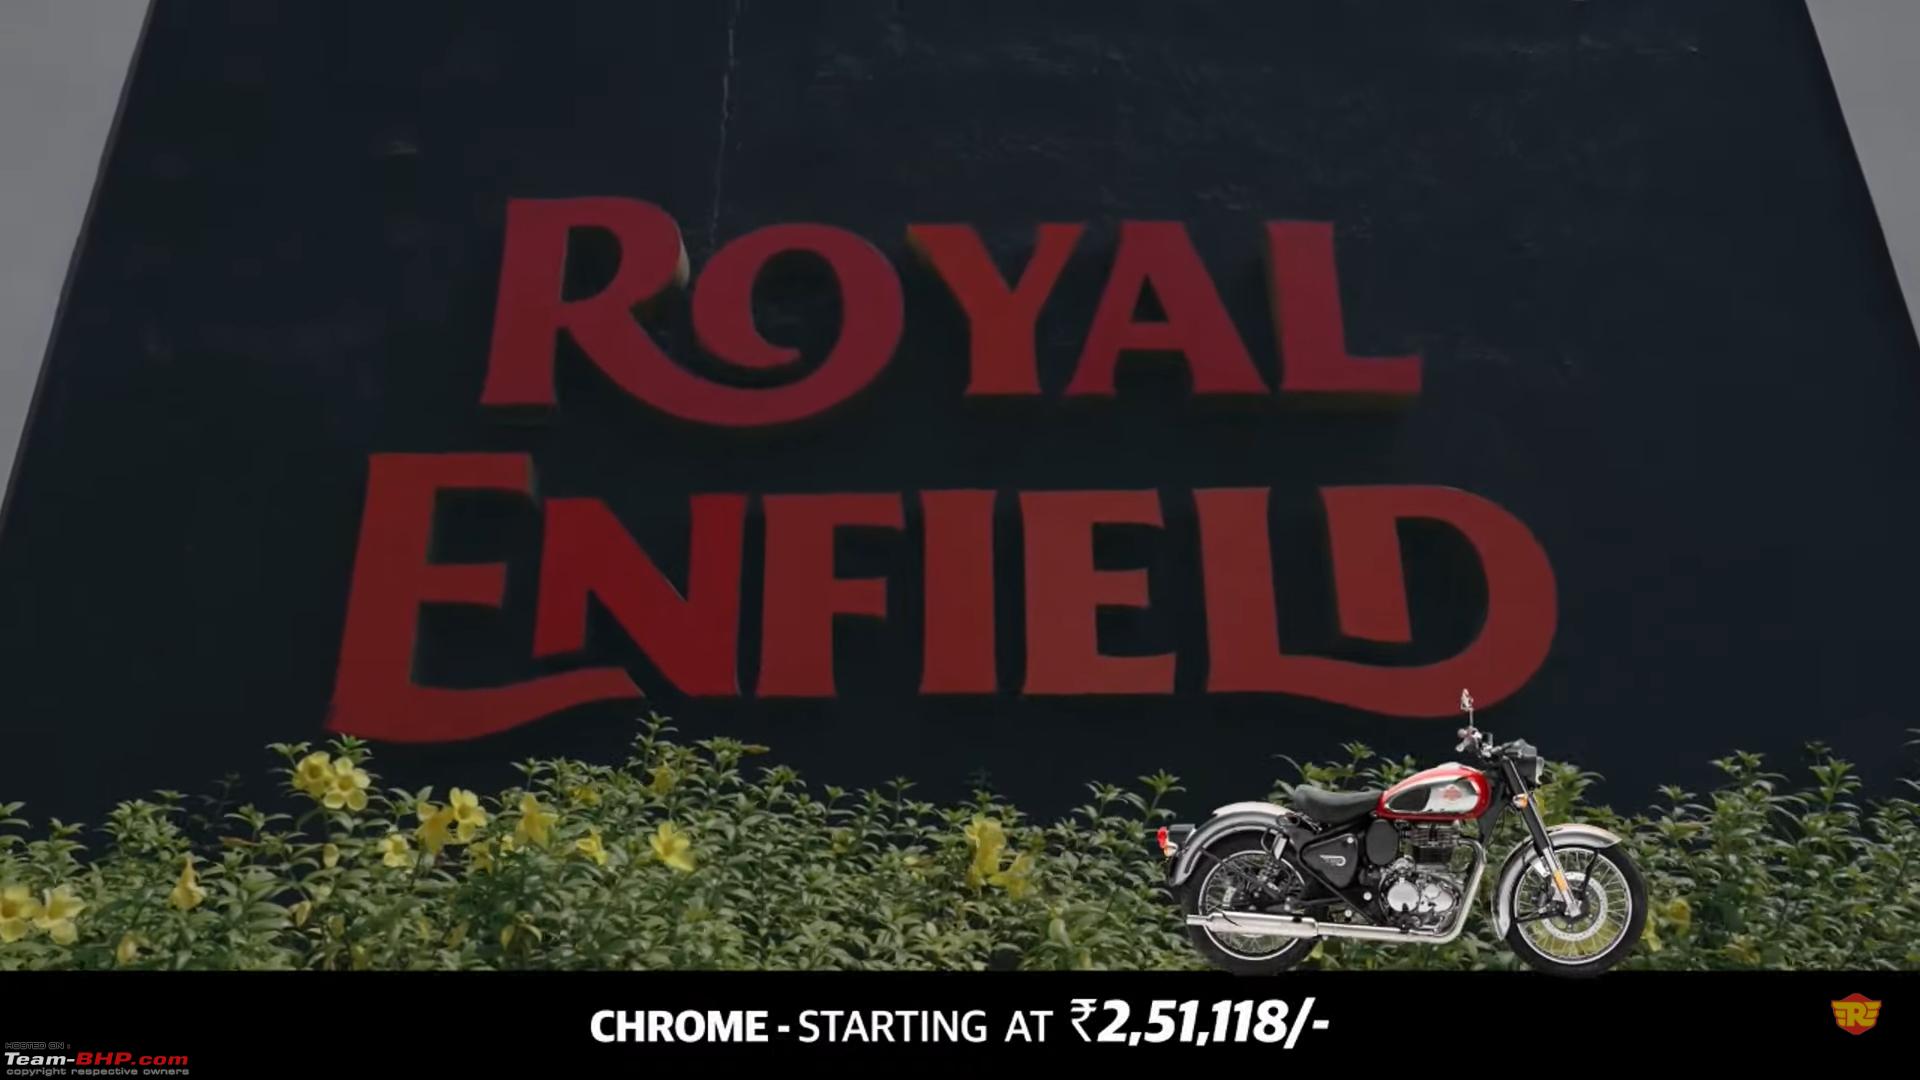 Royal Enfield forays into Japan, opens store in Tokyo - The Economic Times